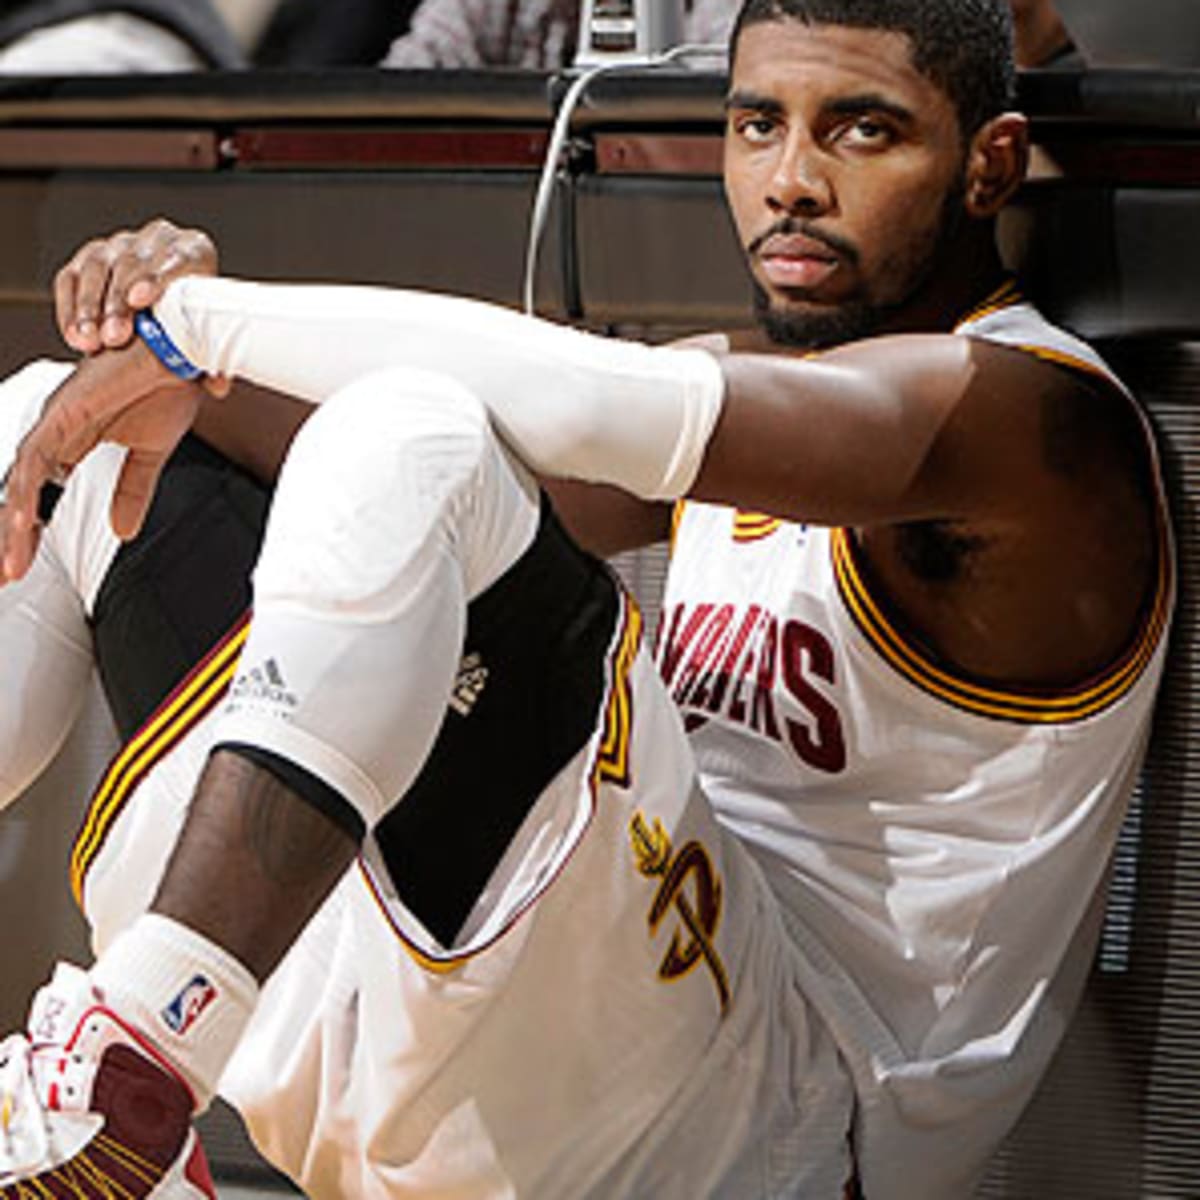 Cavs' Kyrie Irving tests knee with brace, questionable for Game 3